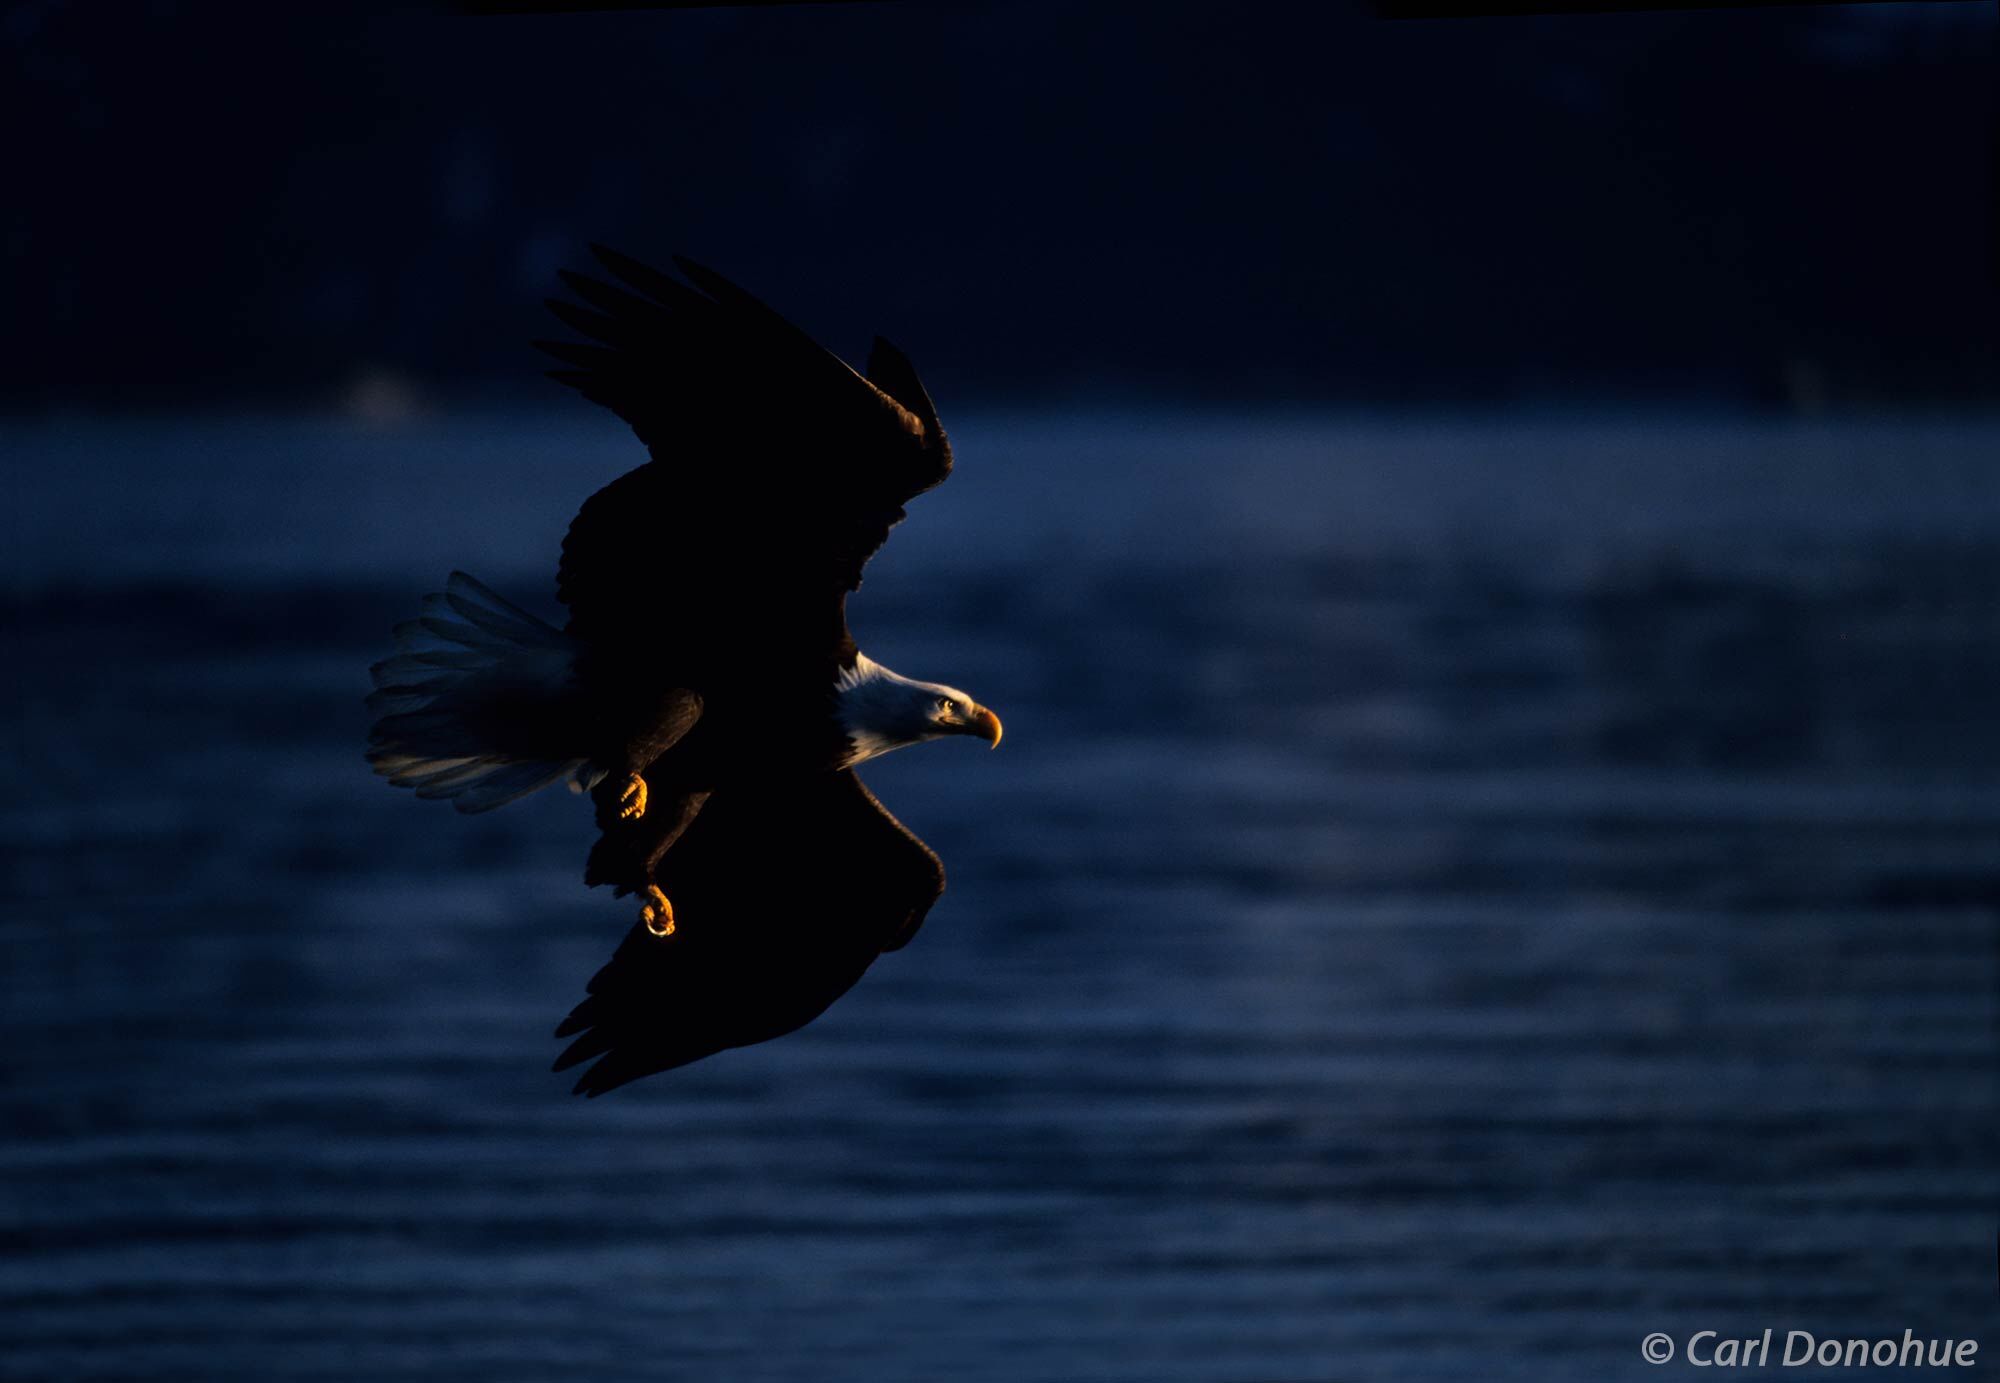 Backlit Bald Eagle Fishing, splashed with light, Homer, Alaska. The bald eagle's striking appearance, with its white head and...